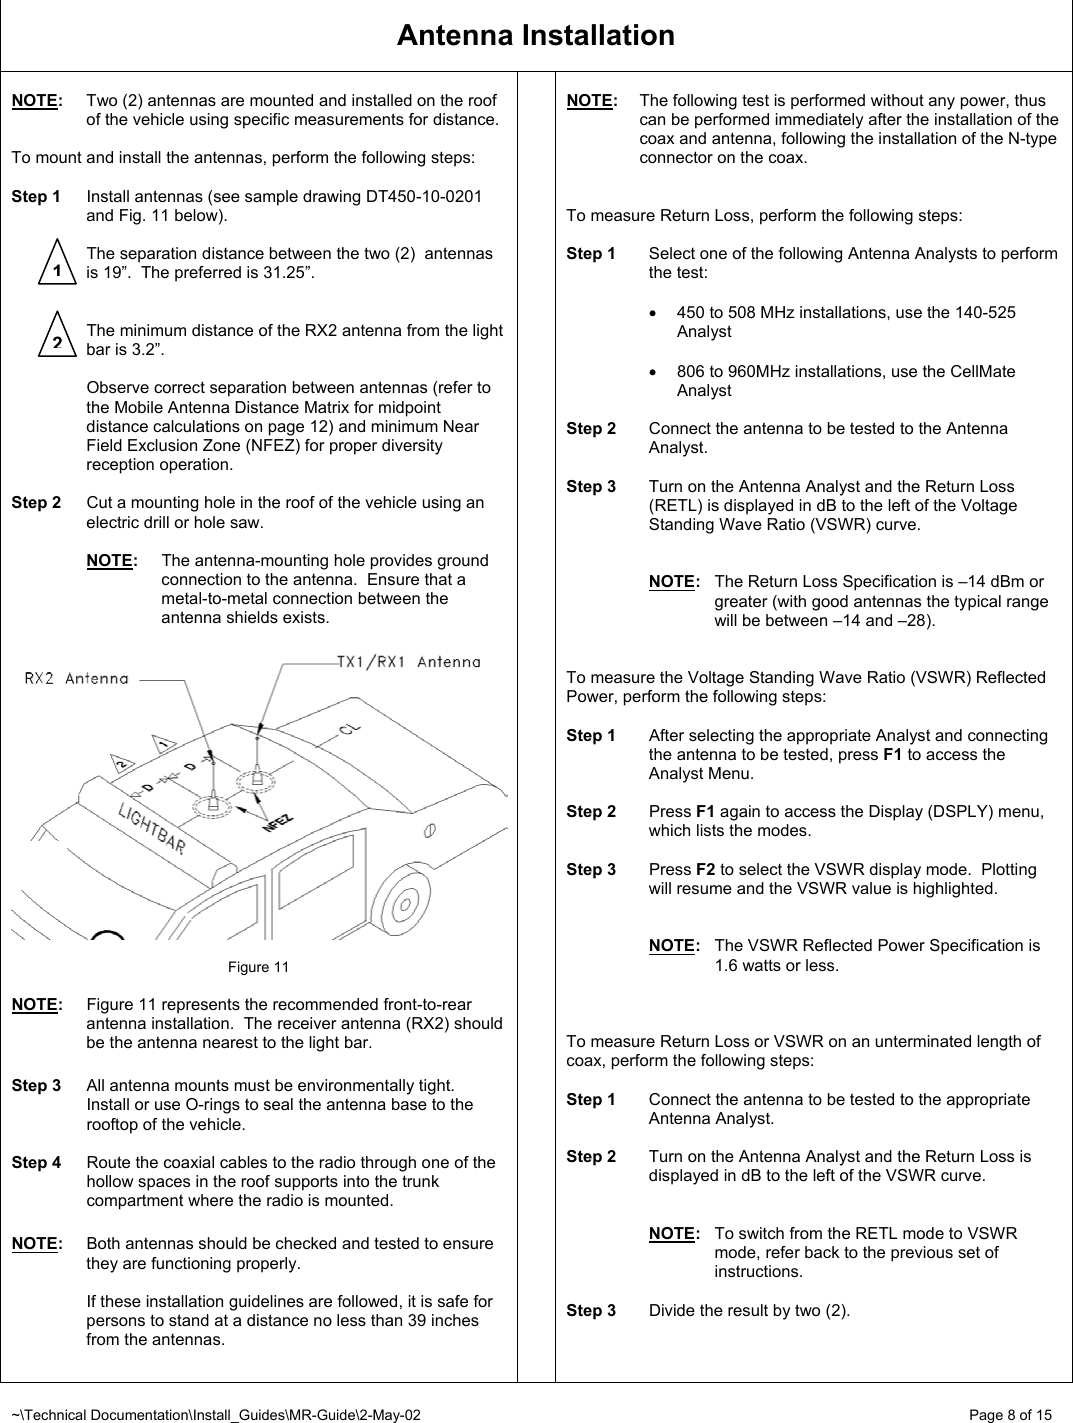 ~\Technical Documentation\Install_Guides\MR-Guide\2-May-02   Page 8 of 15 Antenna Installation  NOTE:  Two (2) antennas are mounted and installed on the roof of the vehicle using specific measurements for distance.  To mount and install the antennas, perform the following steps:  Step 1  Install antennas (see sample drawing DT450-10-0201 and Fig. 11 below).    The separation distance between the two (2)  antennas is 19”.  The preferred is 31.25”.      The minimum distance of the RX2 antenna from the light bar is 3.2”.    Observe correct separation between antennas (refer to the Mobile Antenna Distance Matrix for midpoint distance calculations on page 12) and minimum Near Field Exclusion Zone (NFEZ) for proper diversity reception operation.  Step 2  Cut a mounting hole in the roof of the vehicle using an electric drill or hole saw.   NOTE:  The antenna-mounting hole provides ground connection to the antenna.  Ensure that a metal-to-metal connection between the antenna shields exists.     Figure 11  NOTE:  Figure 11 represents the recommended front-to-rear antenna installation.  The receiver antenna (RX2) should be the antenna nearest to the light bar.  Step 3  All antenna mounts must be environmentally tight.  Install or use O-rings to seal the antenna base to the rooftop of the vehicle.  Step 4  Route the coaxial cables to the radio through one of the hollow spaces in the roof supports into the trunk compartment where the radio is mounted.  NOTE:  Both antennas should be checked and tested to ensure they are functioning properly.    If these installation guidelines are followed, it is safe for persons to stand at a distance no less than 39 inches from the antennas.   NOTE:  The following test is performed without any power, thus can be performed immediately after the installation of the coax and antenna, following the installation of the N-type connector on the coax.    To measure Return Loss, perform the following steps:  Step 1  Select one of the following Antenna Analysts to perform the test:  •  450 to 508 MHz installations, use the 140-525 Analyst  •  806 to 960MHz installations, use the CellMate Analyst  Step 2  Connect the antenna to be tested to the Antenna Analyst.  Step 3  Turn on the Antenna Analyst and the Return Loss (RETL) is displayed in dB to the left of the Voltage Standing Wave Ratio (VSWR) curve.   NOTE:  The Return Loss Specification is –14 dBm or greater (with good antennas the typical range will be between –14 and –28).   To measure the Voltage Standing Wave Ratio (VSWR) Reflected Power, perform the following steps:  Step 1  After selecting the appropriate Analyst and connecting the antenna to be tested, press F1 to access the Analyst Menu.    Step 2 Press F1 again to access the Display (DSPLY) menu, which lists the modes.  Step 3 Press F2 to select the VSWR display mode.  Plotting will resume and the VSWR value is highlighted.   NOTE:  The VSWR Reflected Power Specification is 1.6 watts or less.    To measure Return Loss or VSWR on an unterminated length of coax, perform the following steps:  Step 1  Connect the antenna to be tested to the appropriate Antenna Analyst.  Step 2  Turn on the Antenna Analyst and the Return Loss is displayed in dB to the left of the VSWR curve.   NOTE:  To switch from the RETL mode to VSWR mode, refer back to the previous set of instructions.  Step 3  Divide the result by two (2).  12